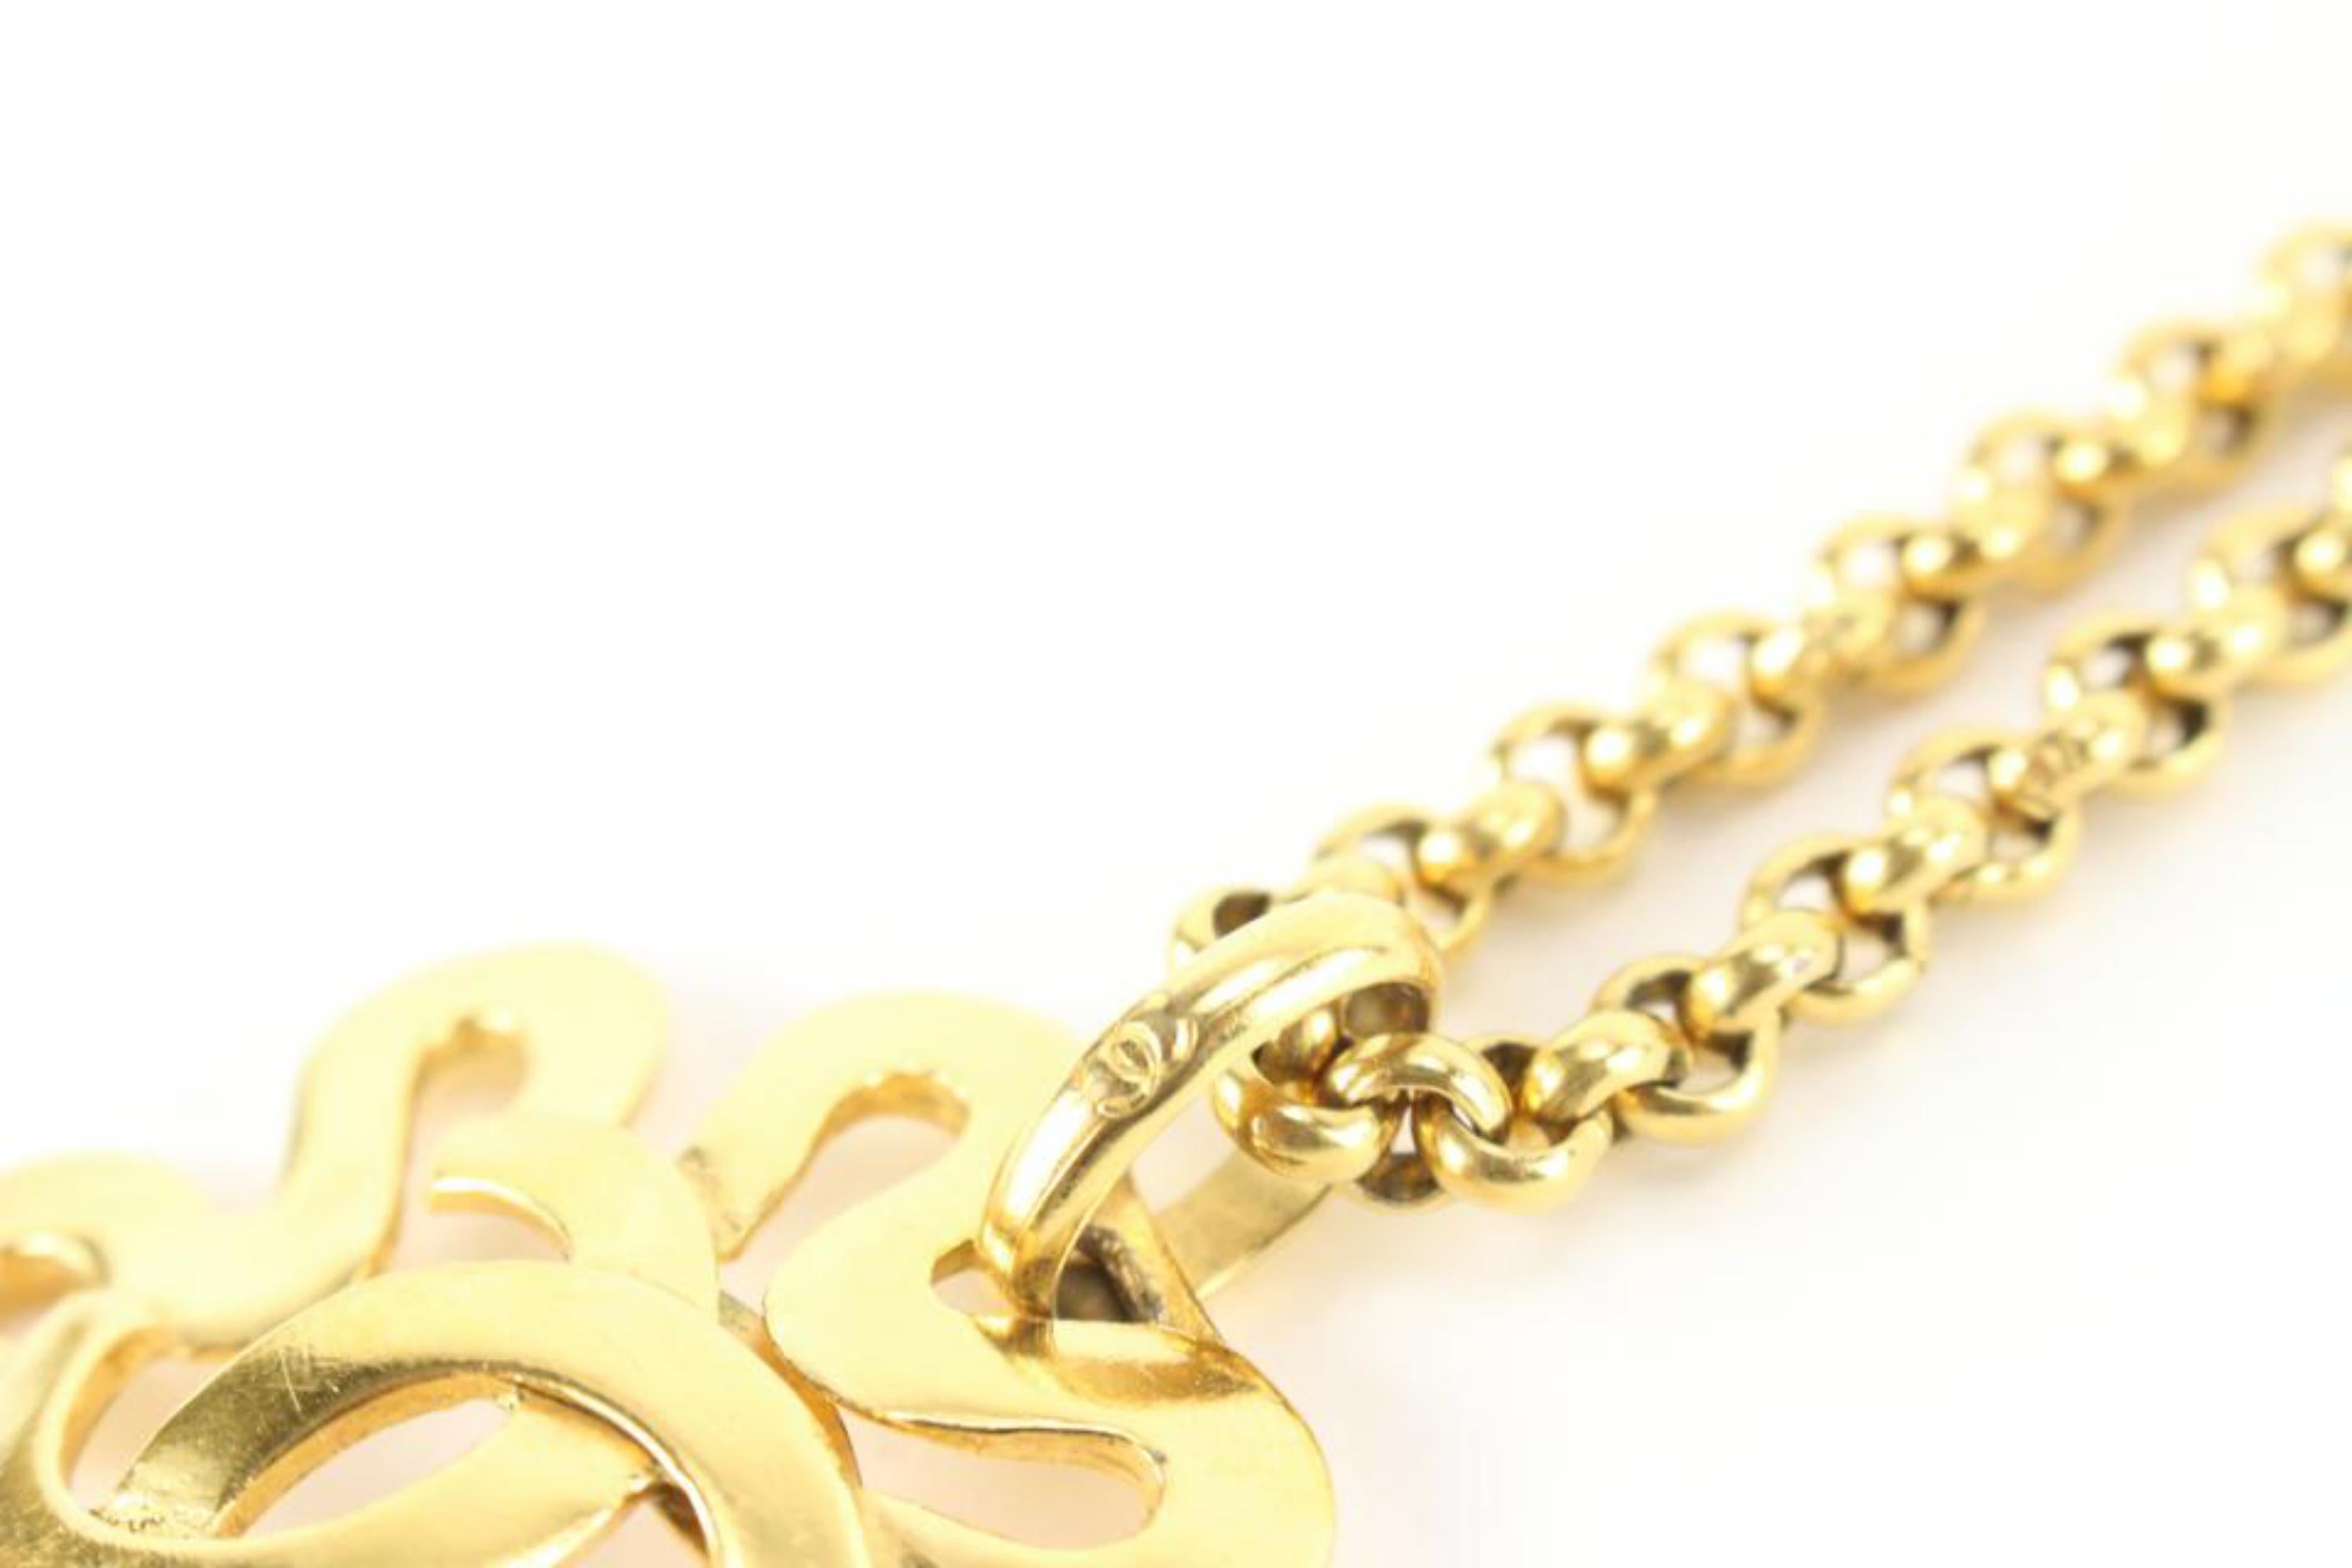 24k gold chanel necklace